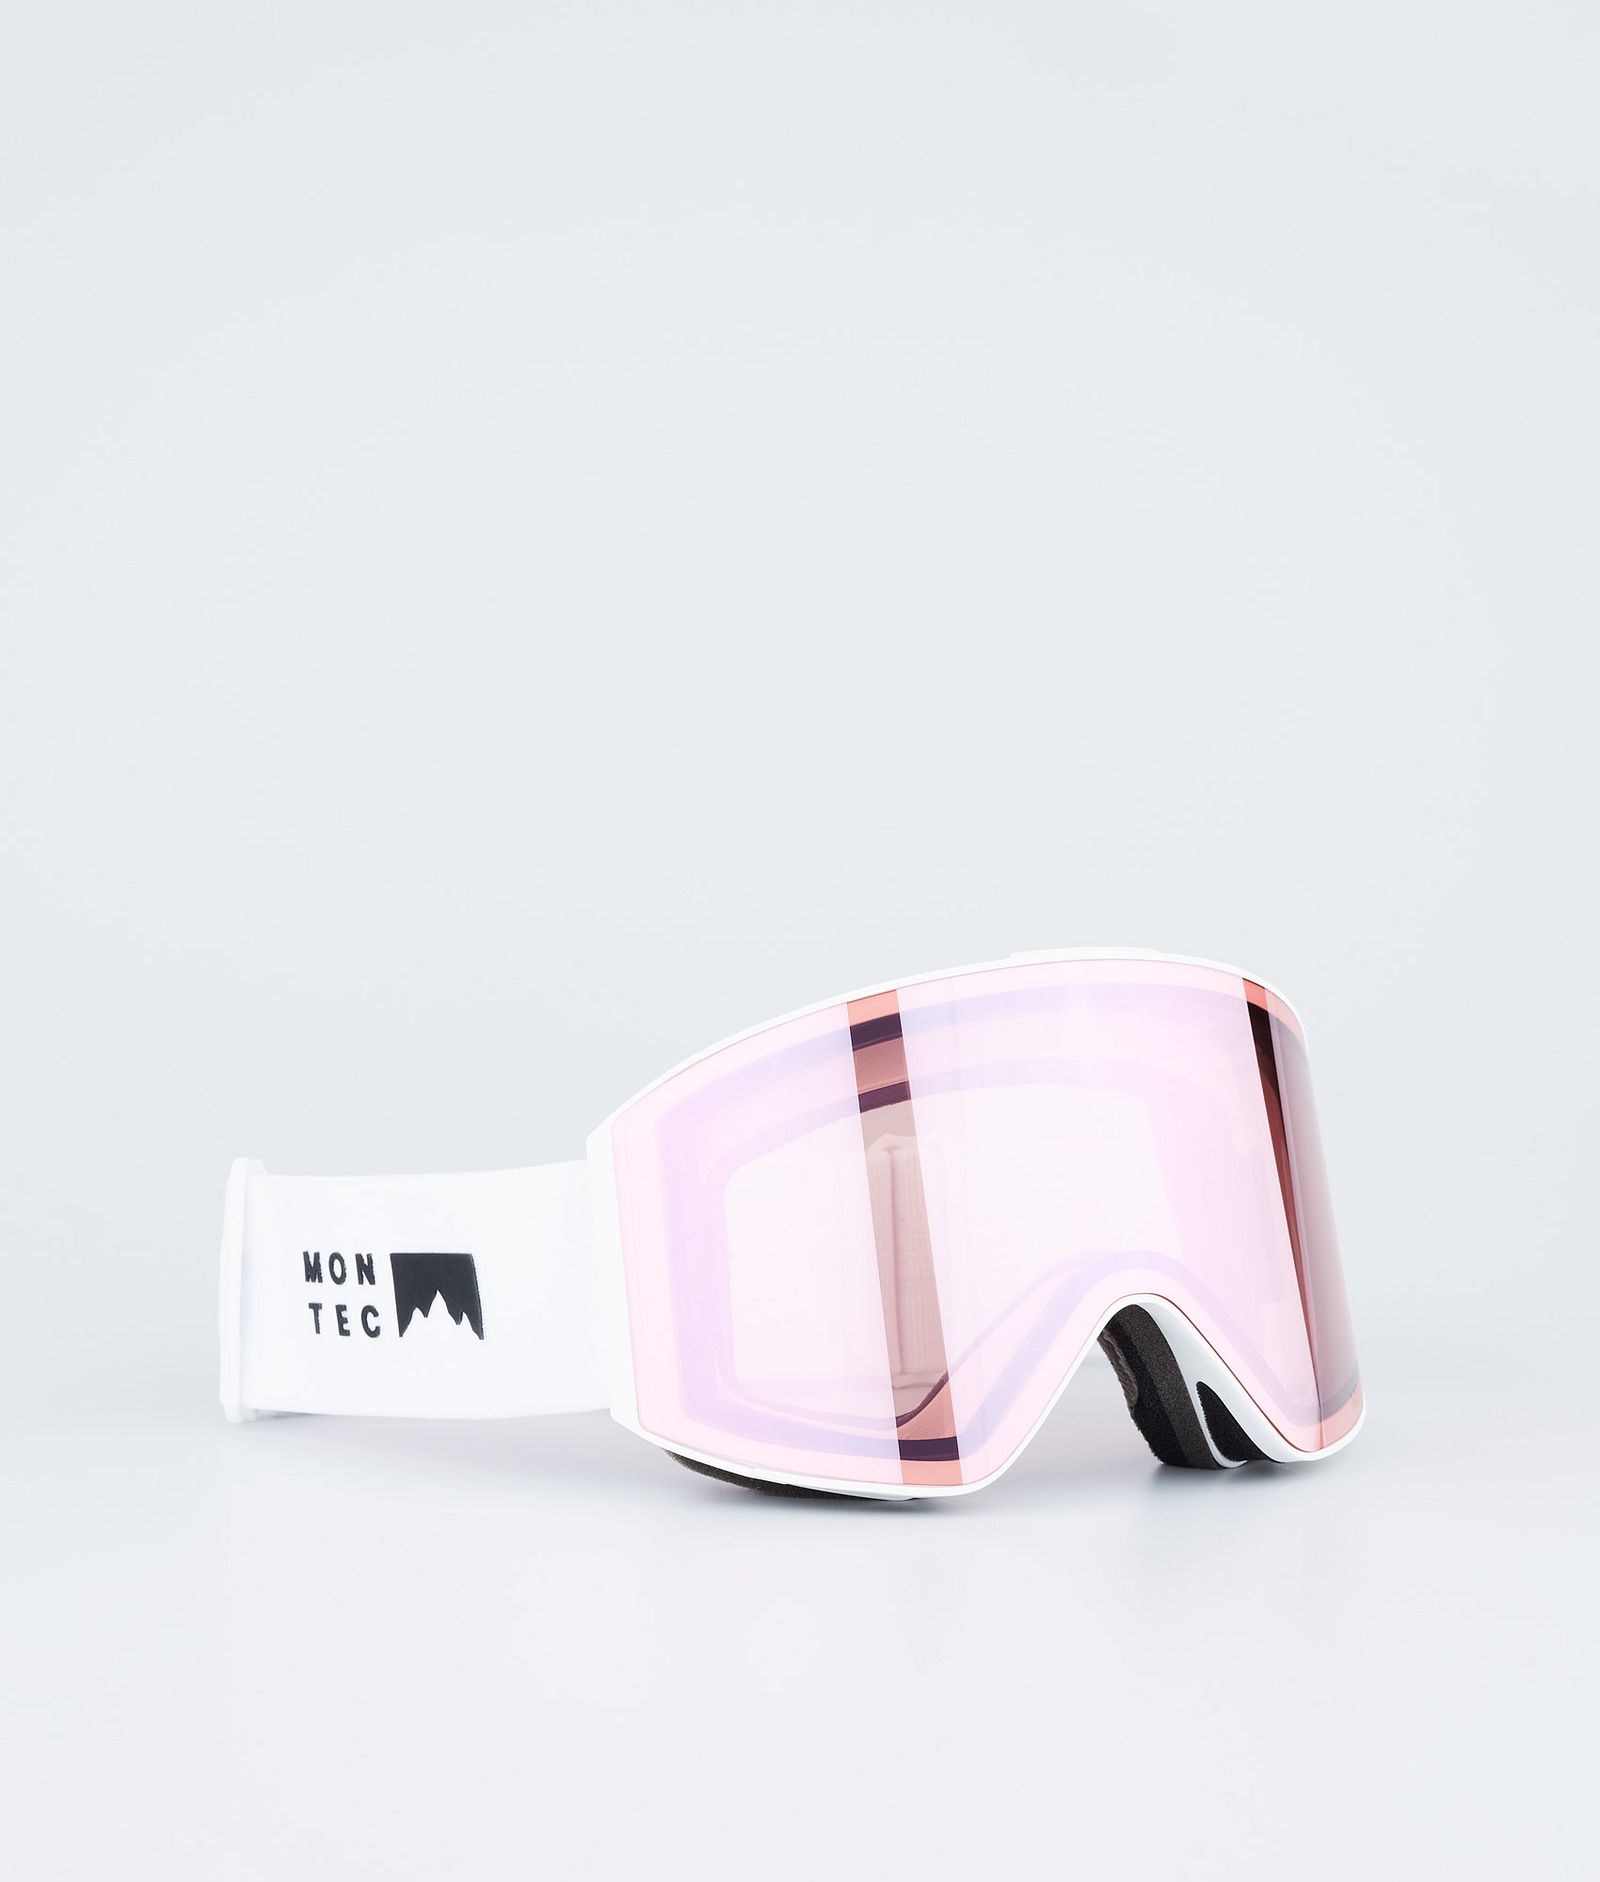 Scope Goggle Lens Snow Vervangingslens Pink Sapphire Mirror